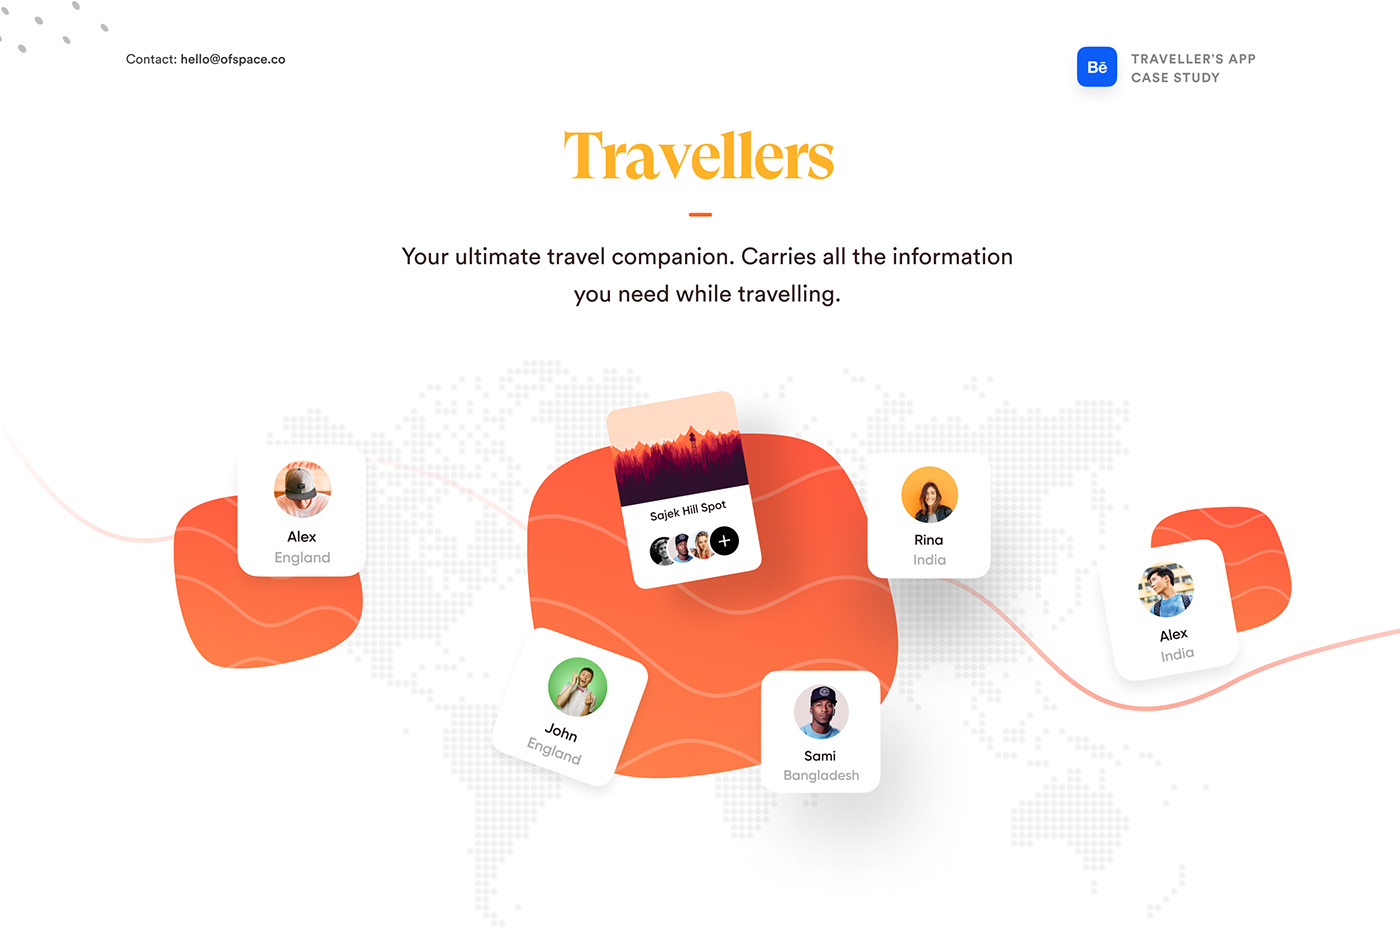 Travel Travelling Booking Booking.com   ofspace Travel App travel web Travel IOS app iOS App Website Design